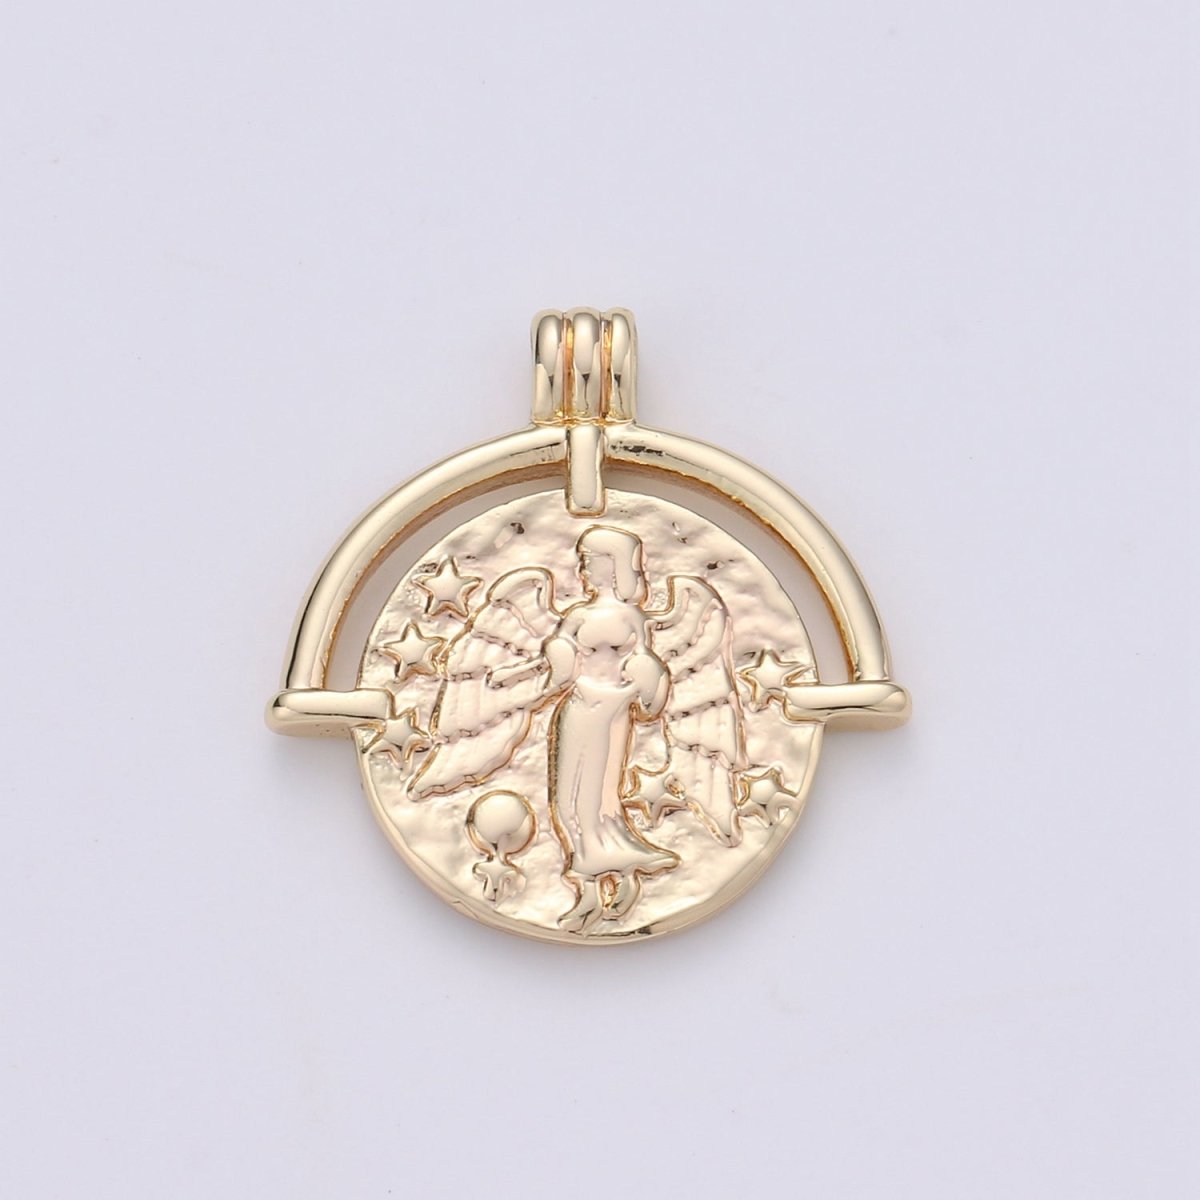 Double Sided 14K Gold Filled Zodiac Horoscope Sign Constellation Medallion Pendant Charm Celestial Astrology Charm Necklace Jewelry Making - DLUXCA